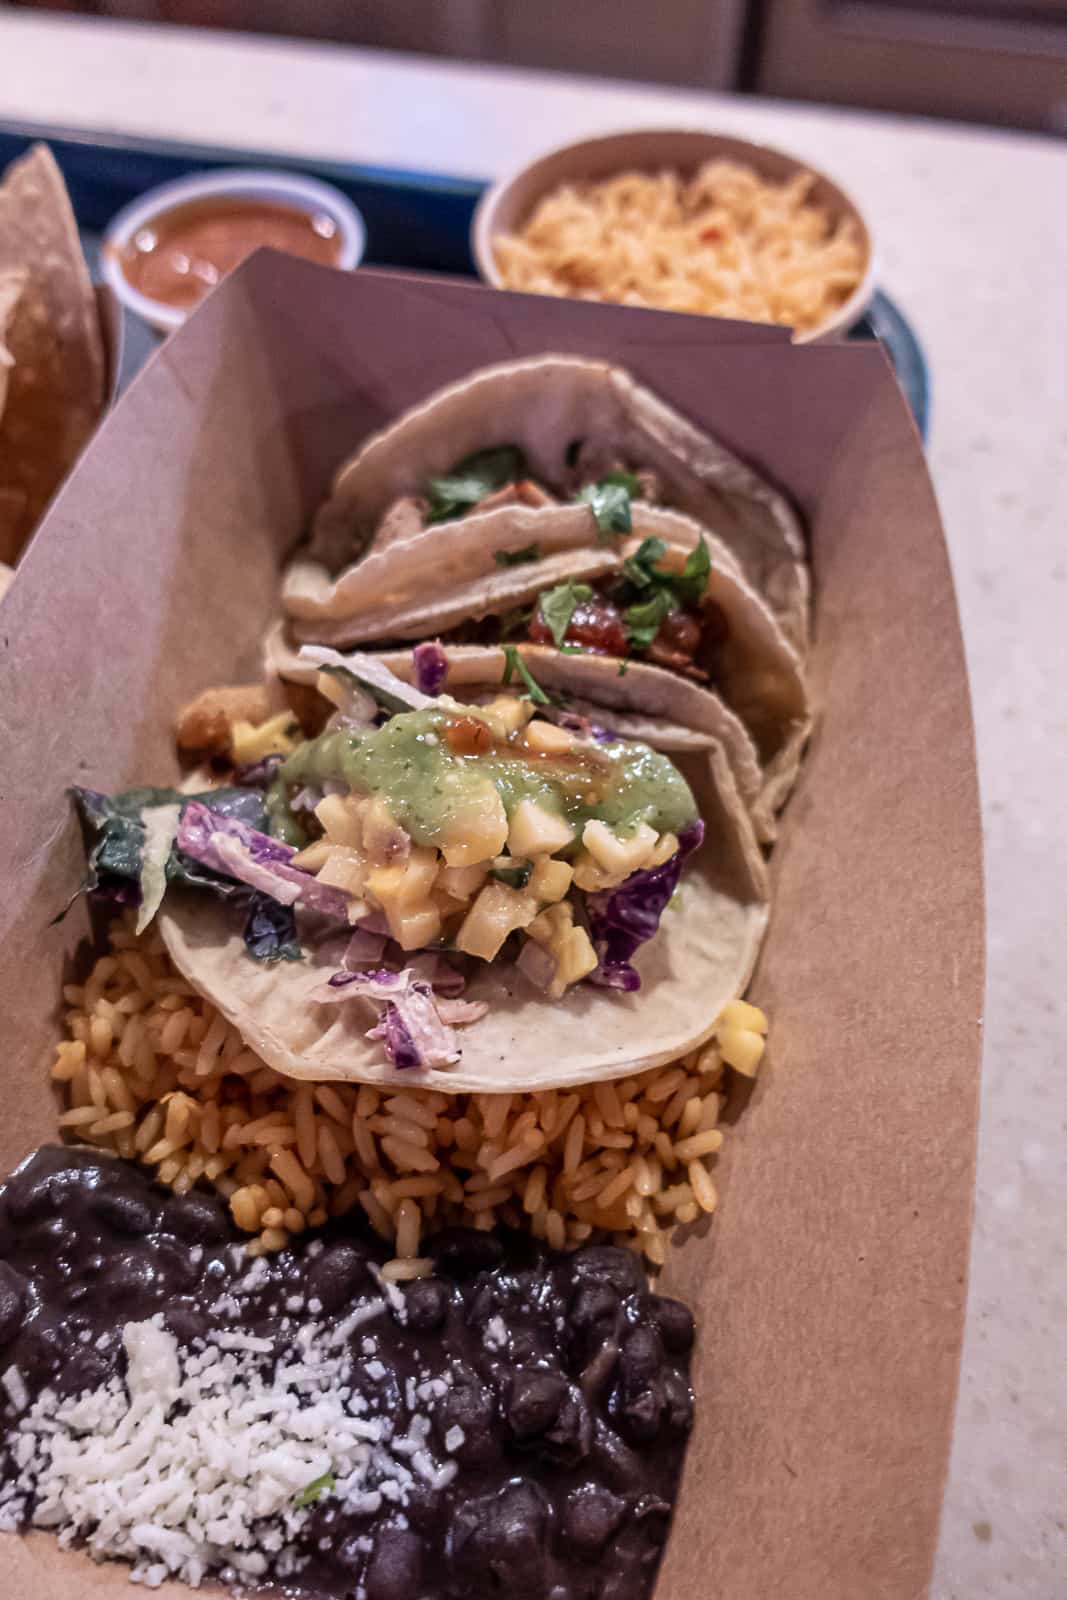 Taco Trio from the menu at Cantina De San Angel in Epcot